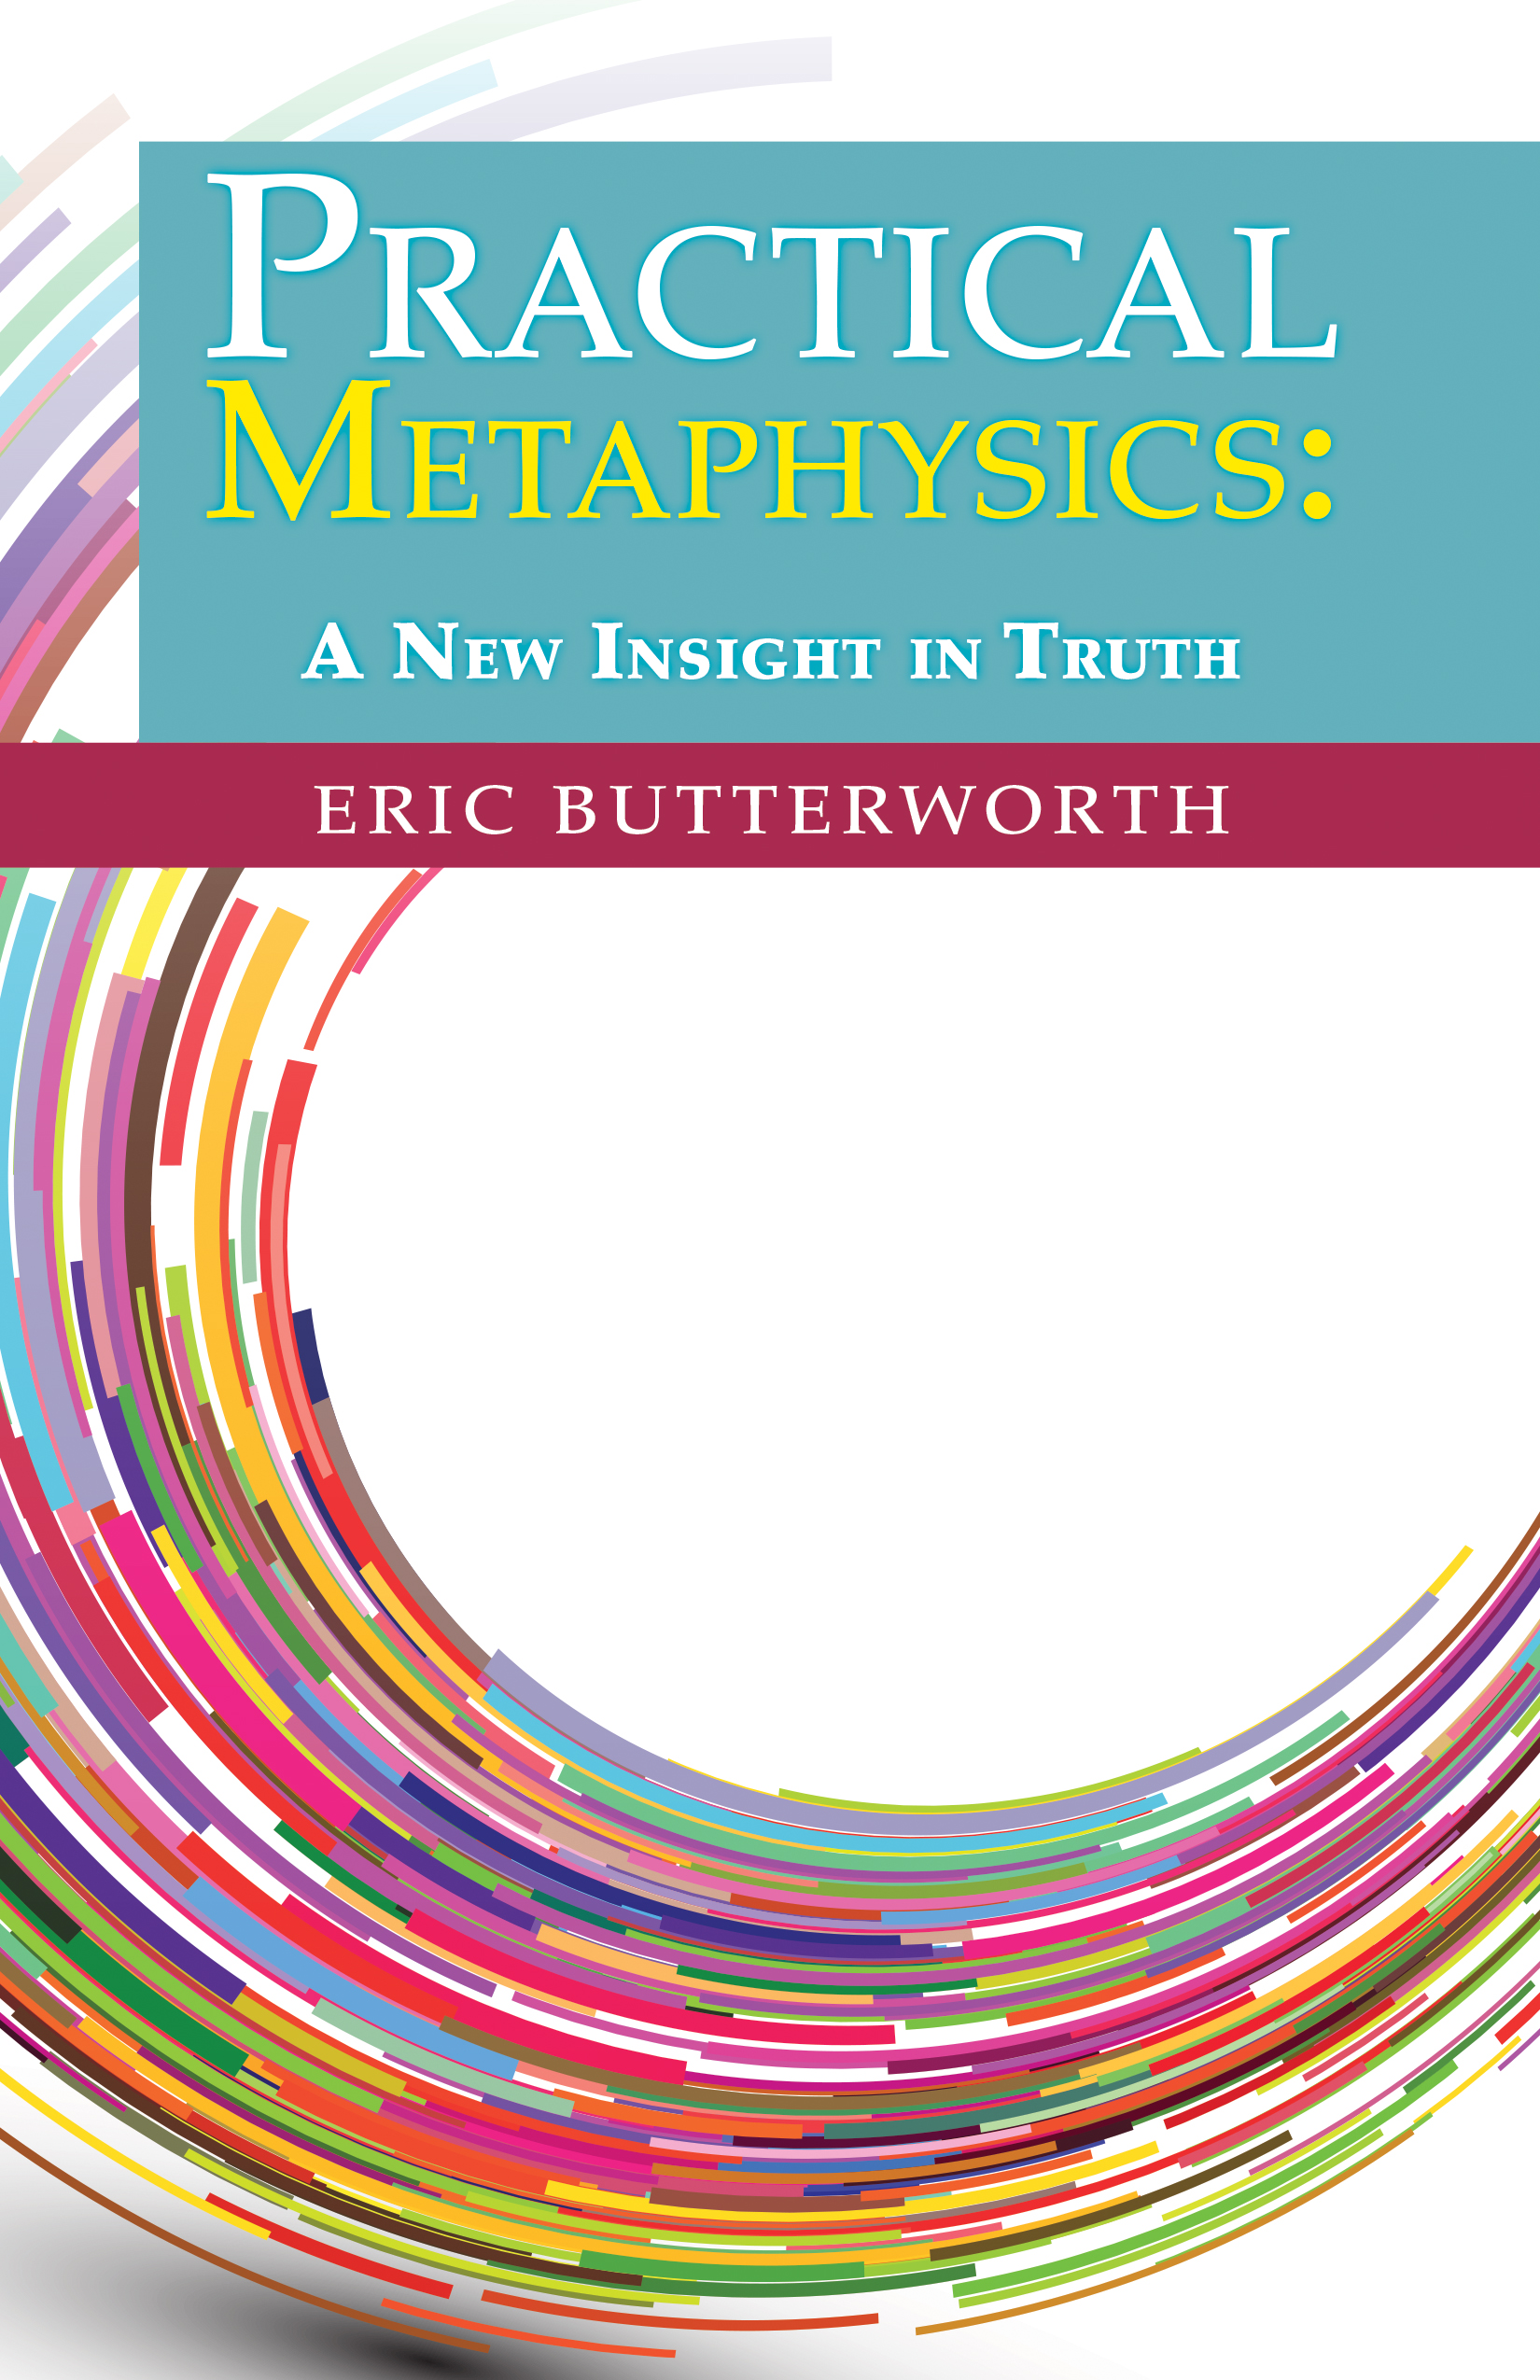 Practical Metaphysics: A New Insight in Truth